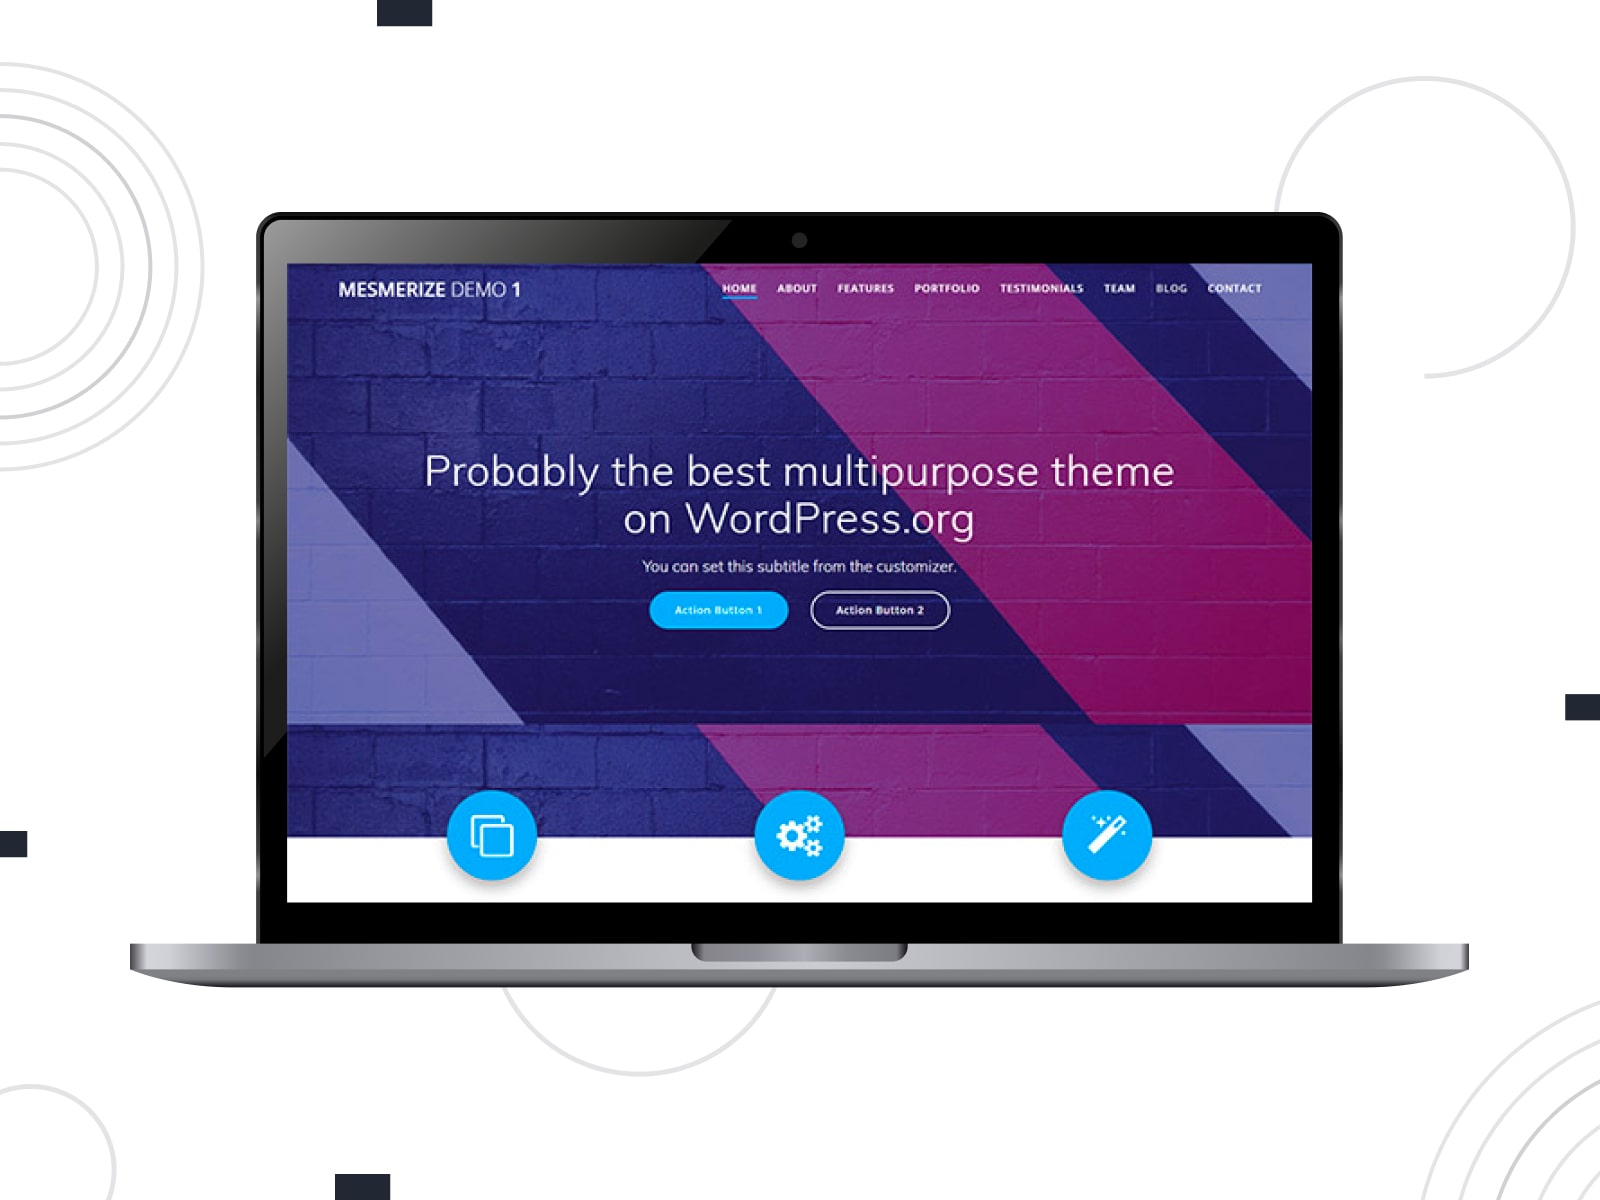 Collage of the Mesmerize free futuristic WordPress theme demo page in blue, violet and white colors.